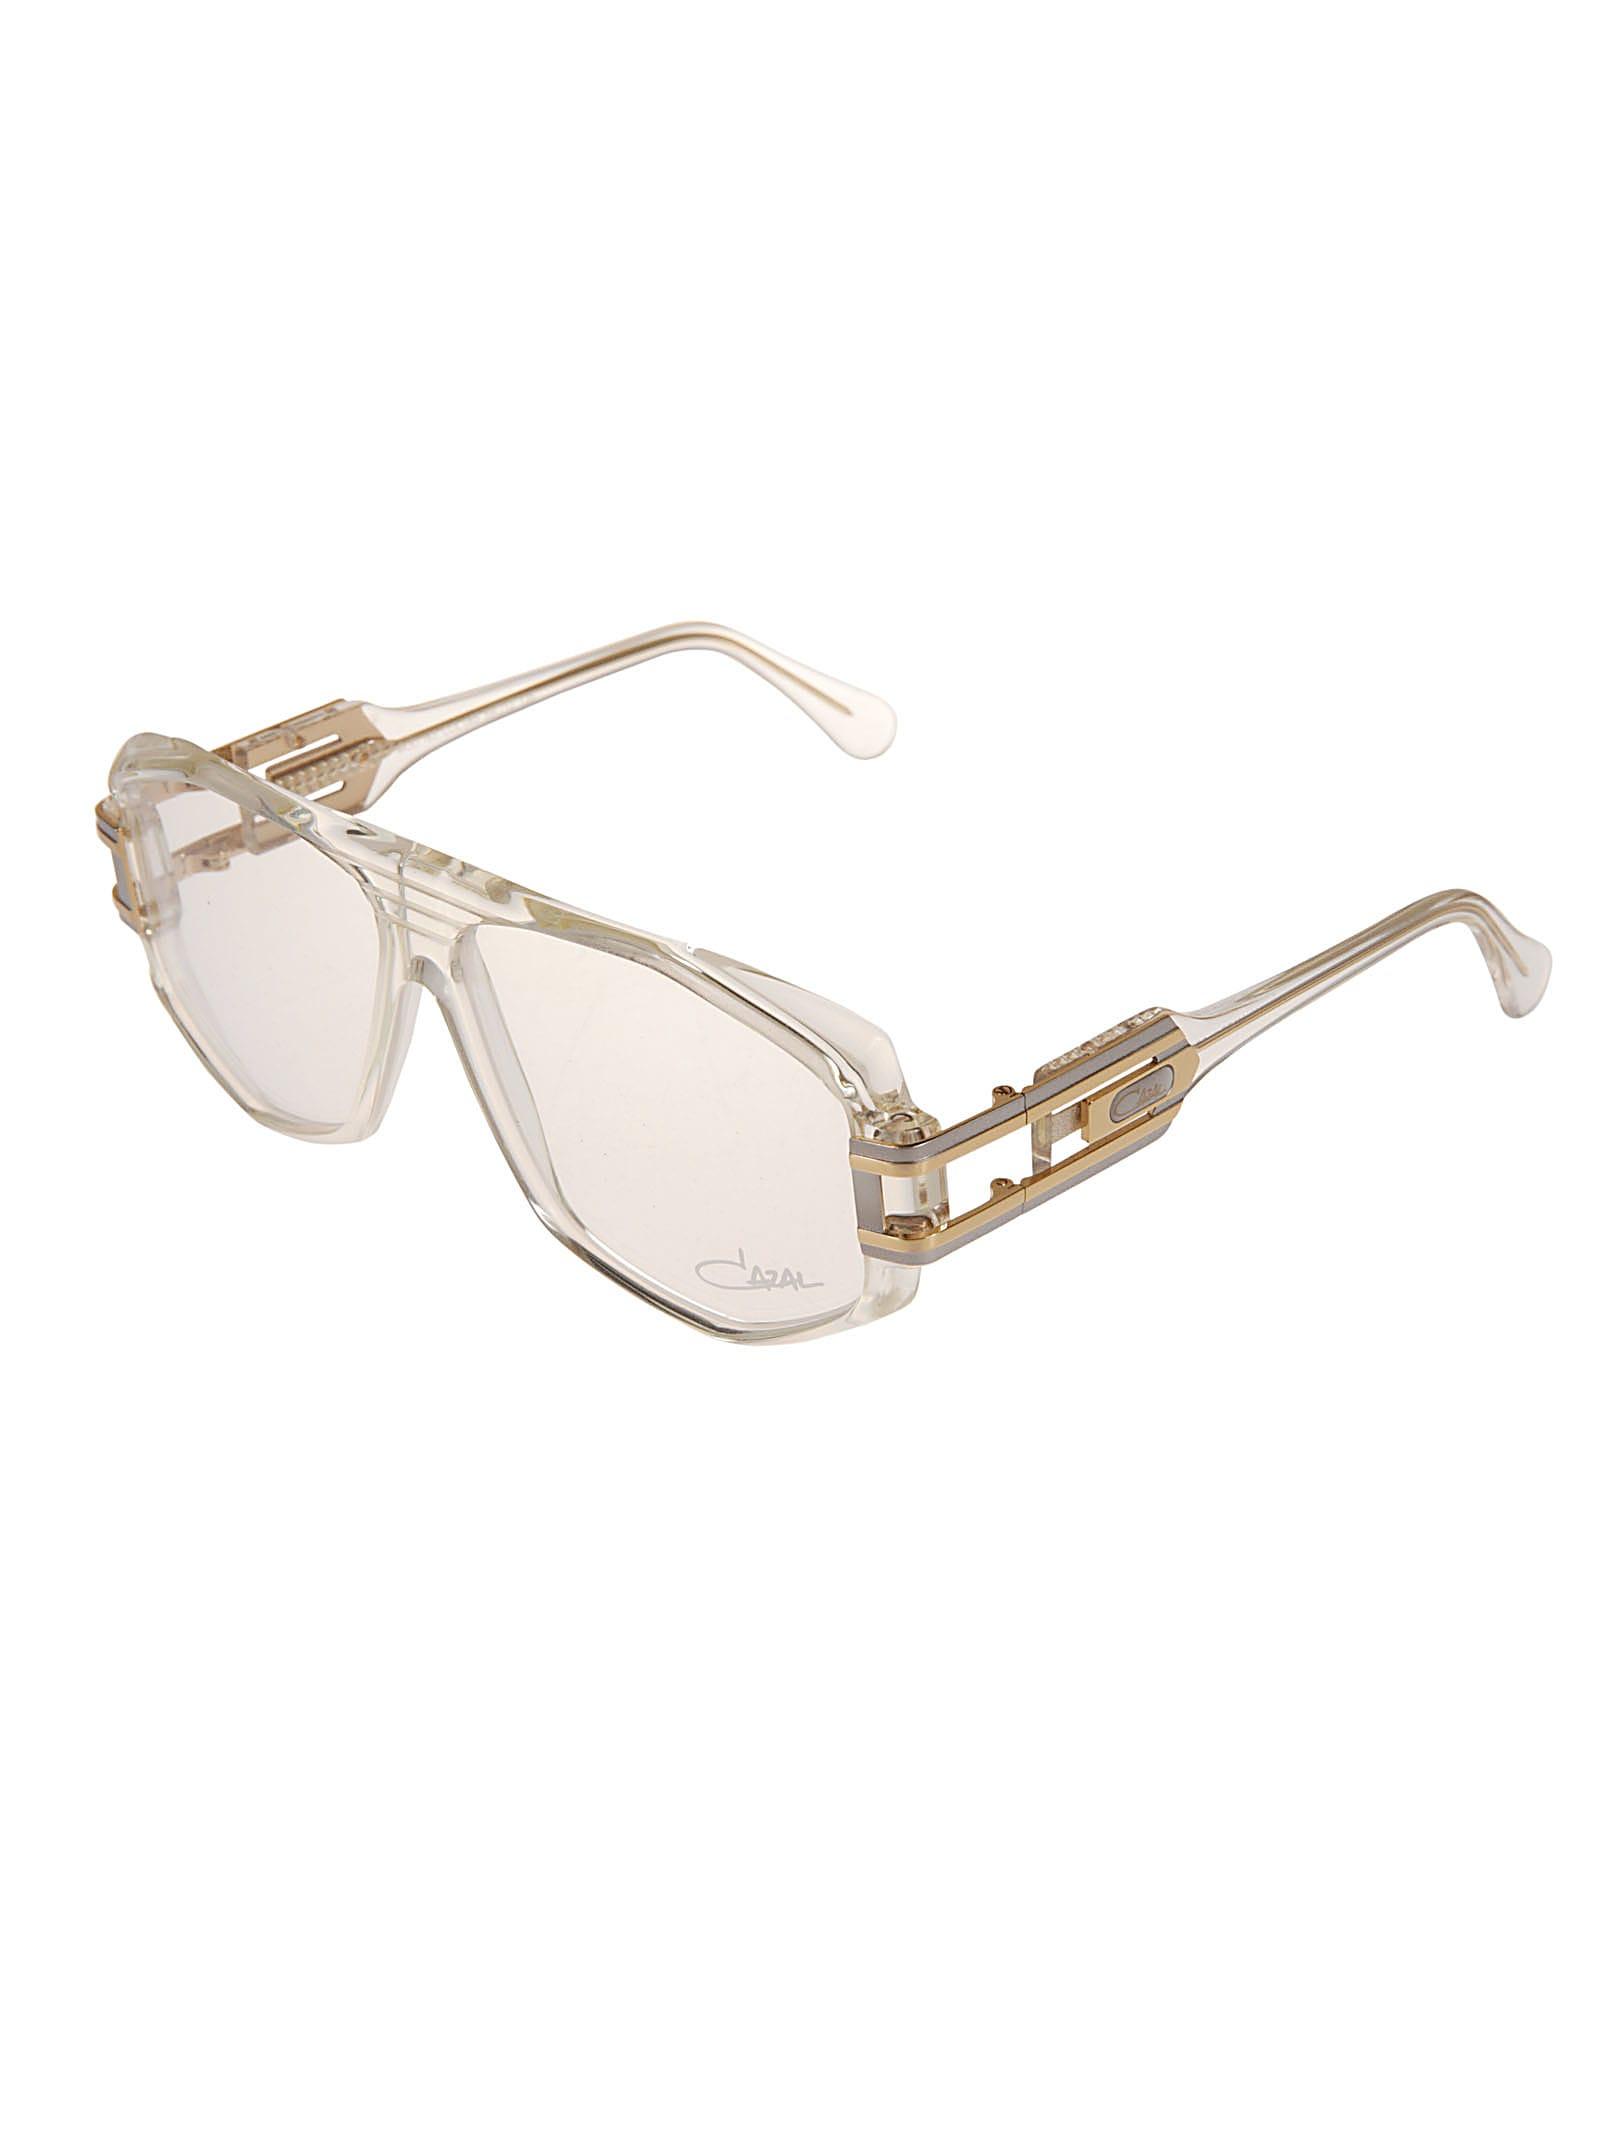 Cazal Hexagon Transparent Glasses in Natural | Lyst